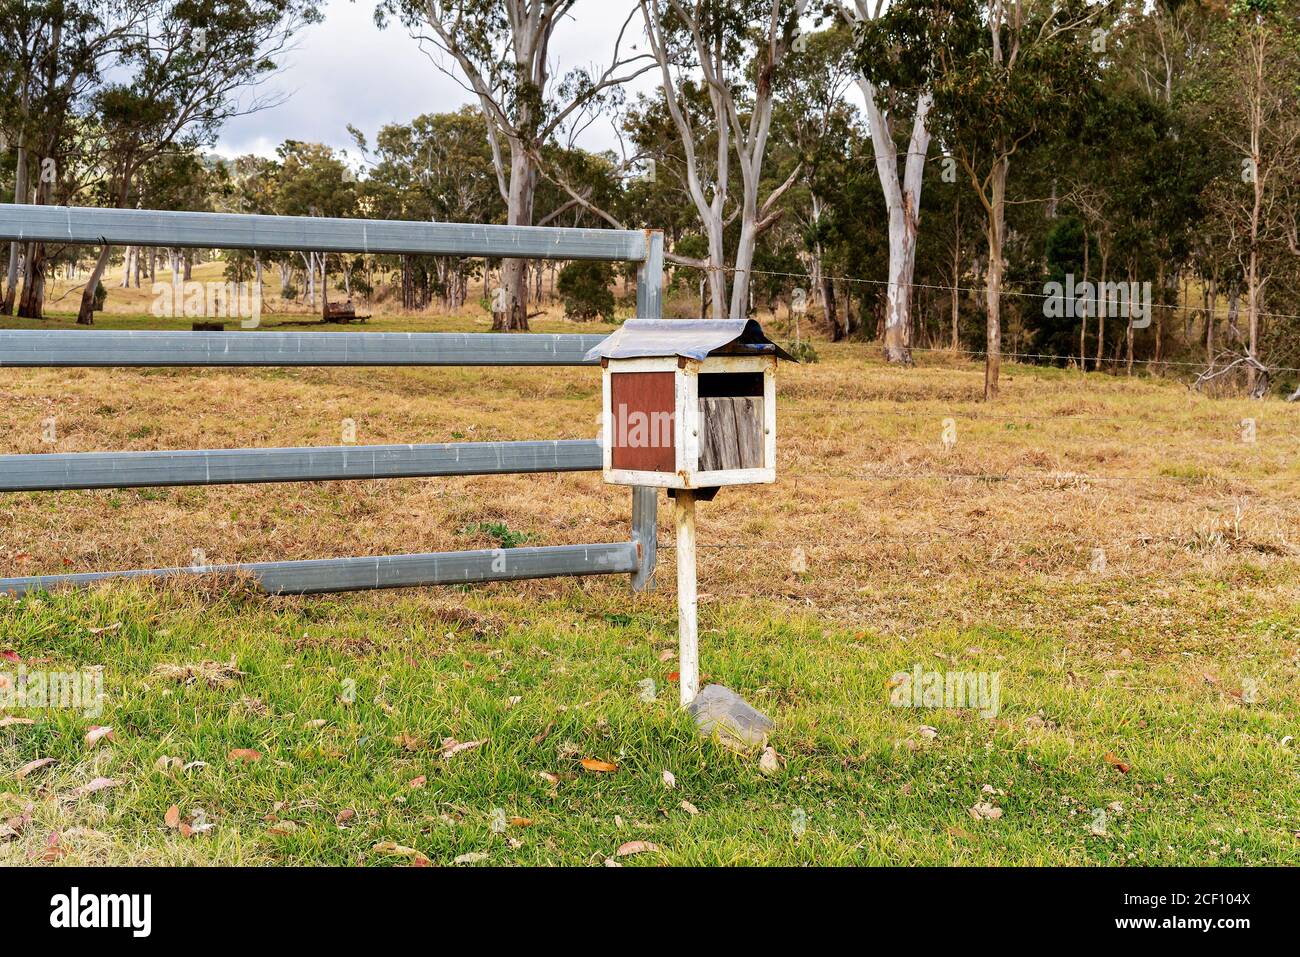 A retro style mail box in front of a fence on a rural property Stock Photo